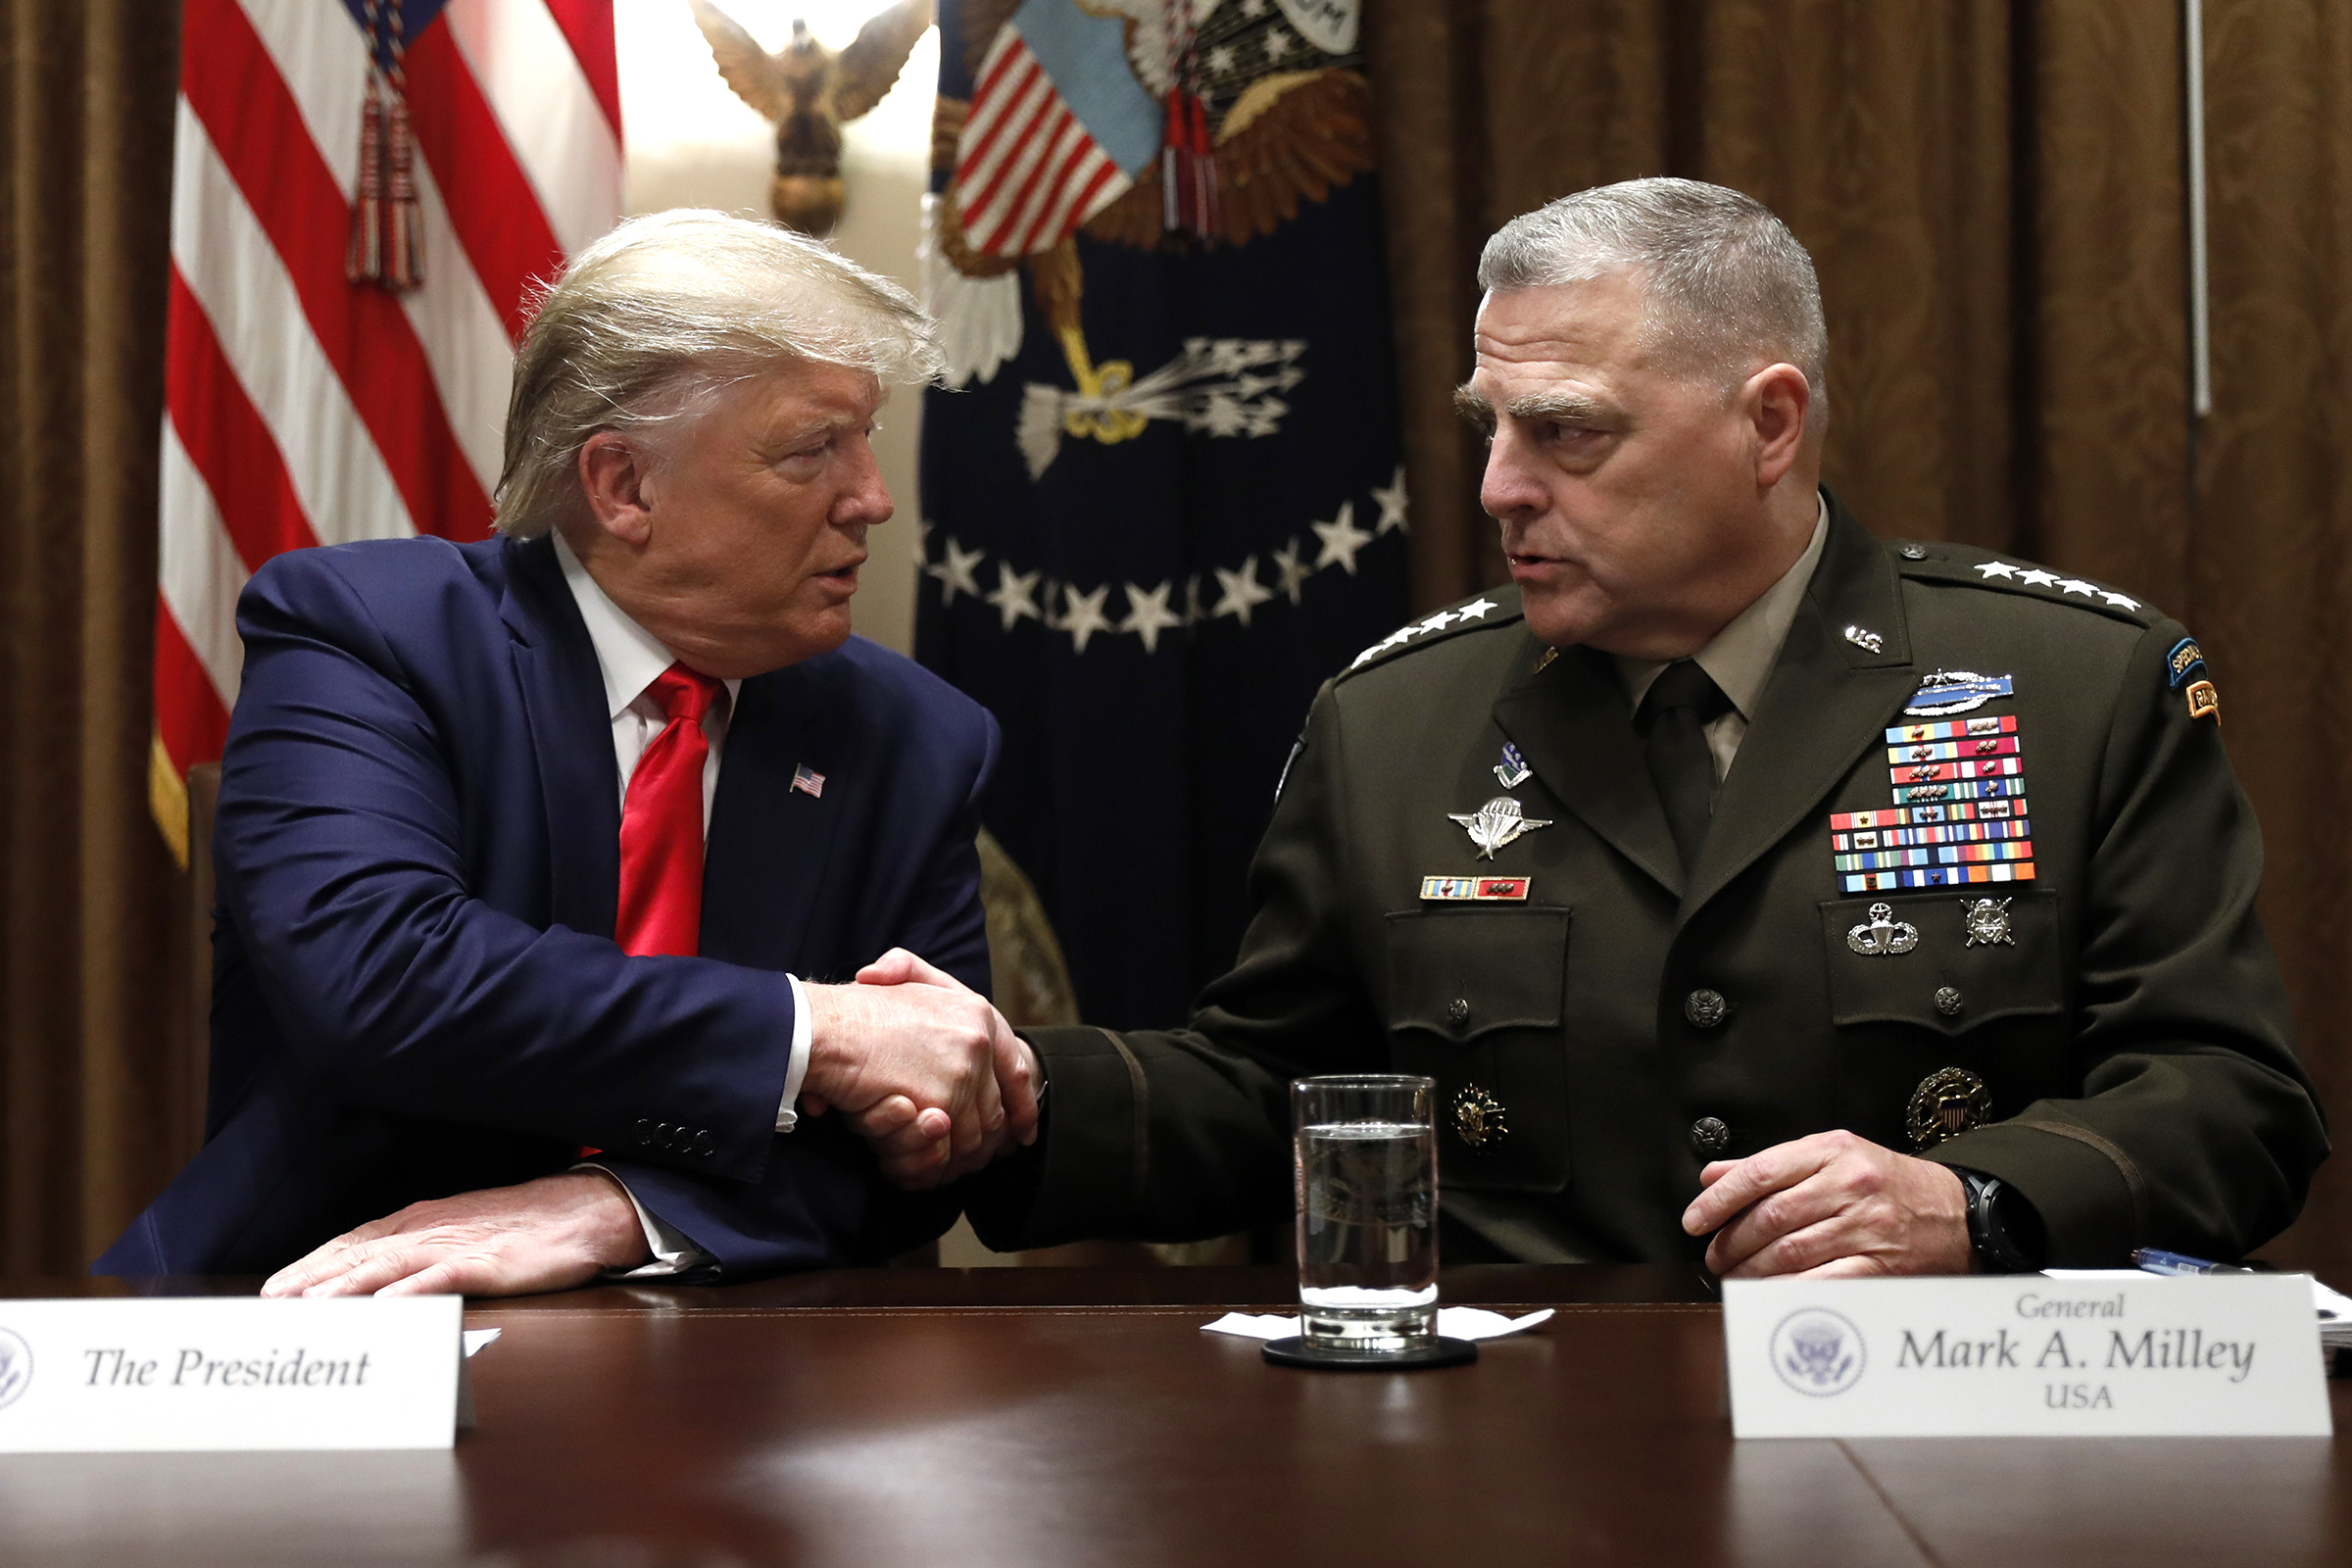 President Donald Trump shakes hands with Chairman of the Joint Chiefs of Staff Gen. Mark Milley during a briefing with senior military leaders in the Cabinet Room at the White House in Washington, on Oct. 7, 2019. (Carolyn Kaster—AP)